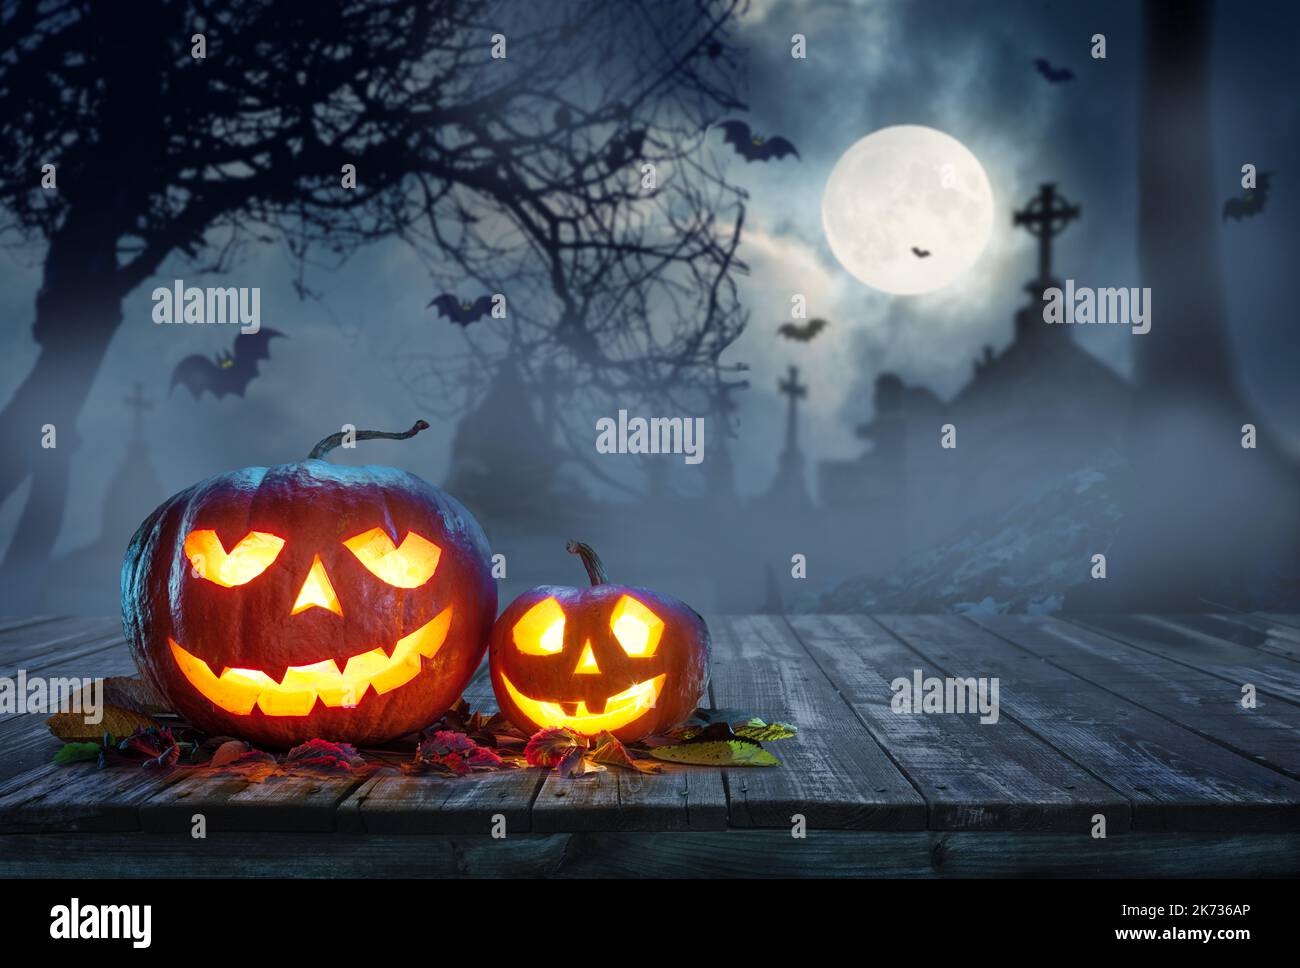 Carved lightening pumpkins for Halloween jack-o'-lanterns with scary smiles to ward of evil spirits on mystery night cemetery background. Halloween ba Stock Photo